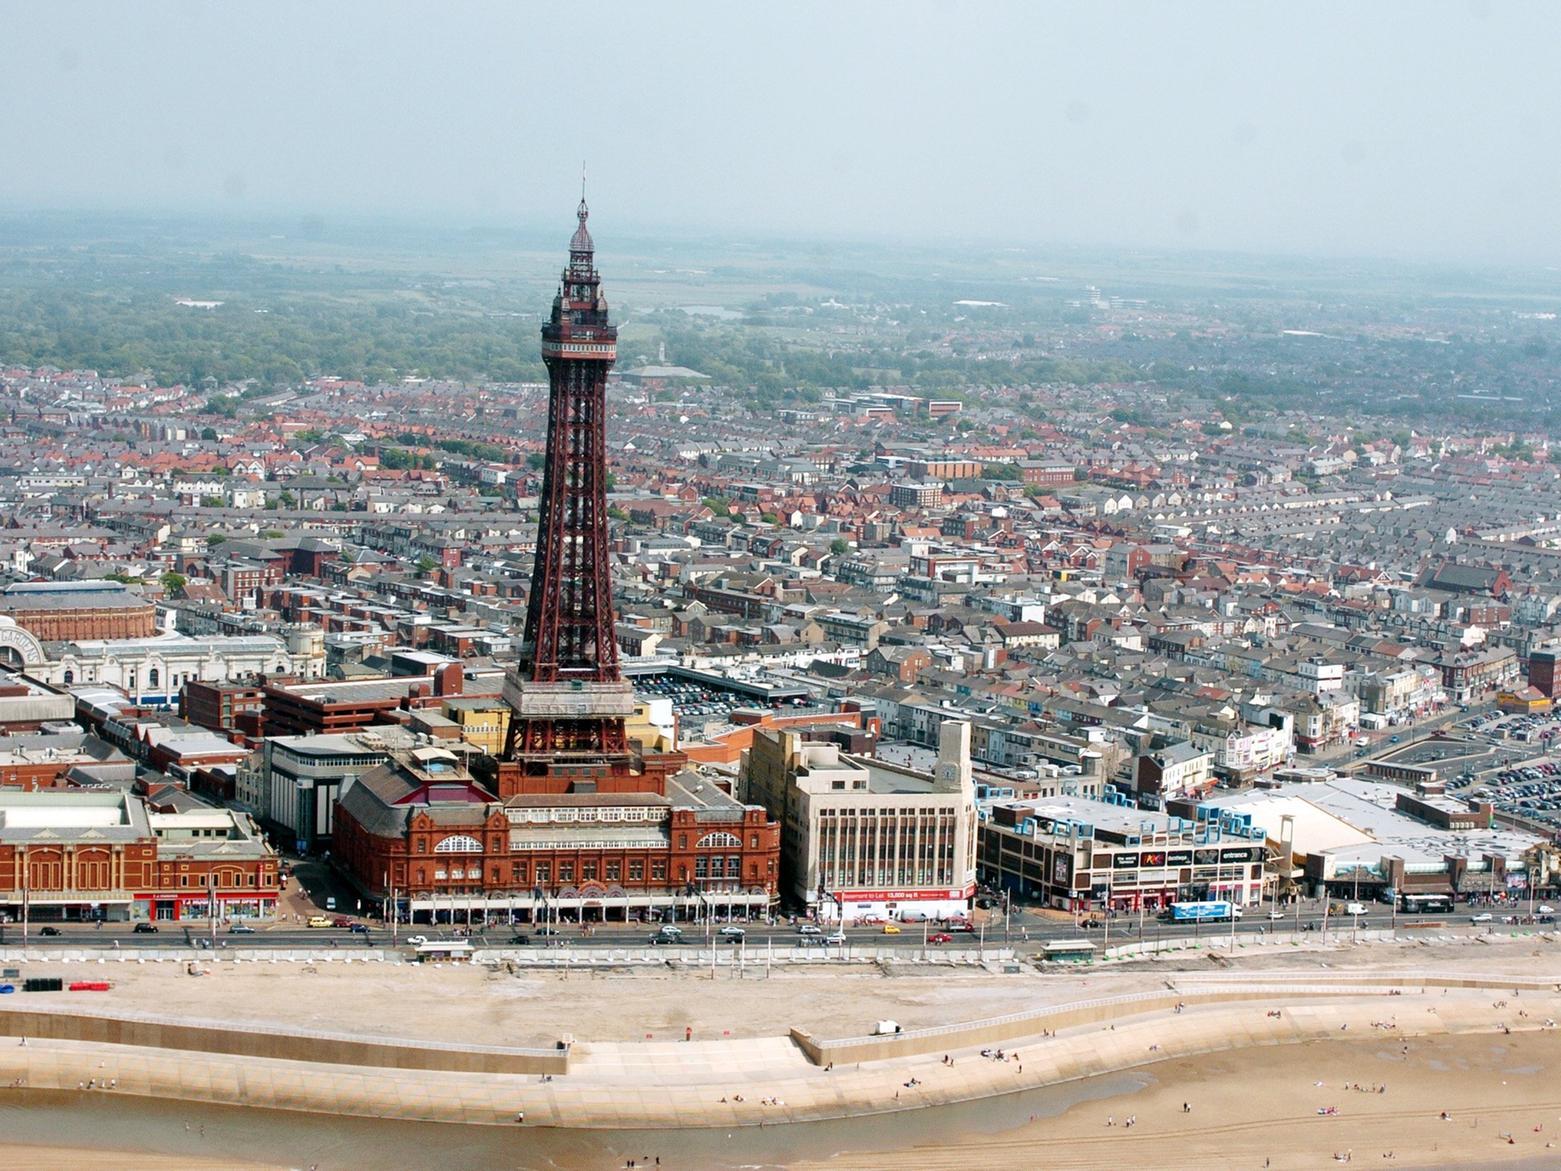 Here are 10 things that have changed in Blackpool since the year 2000